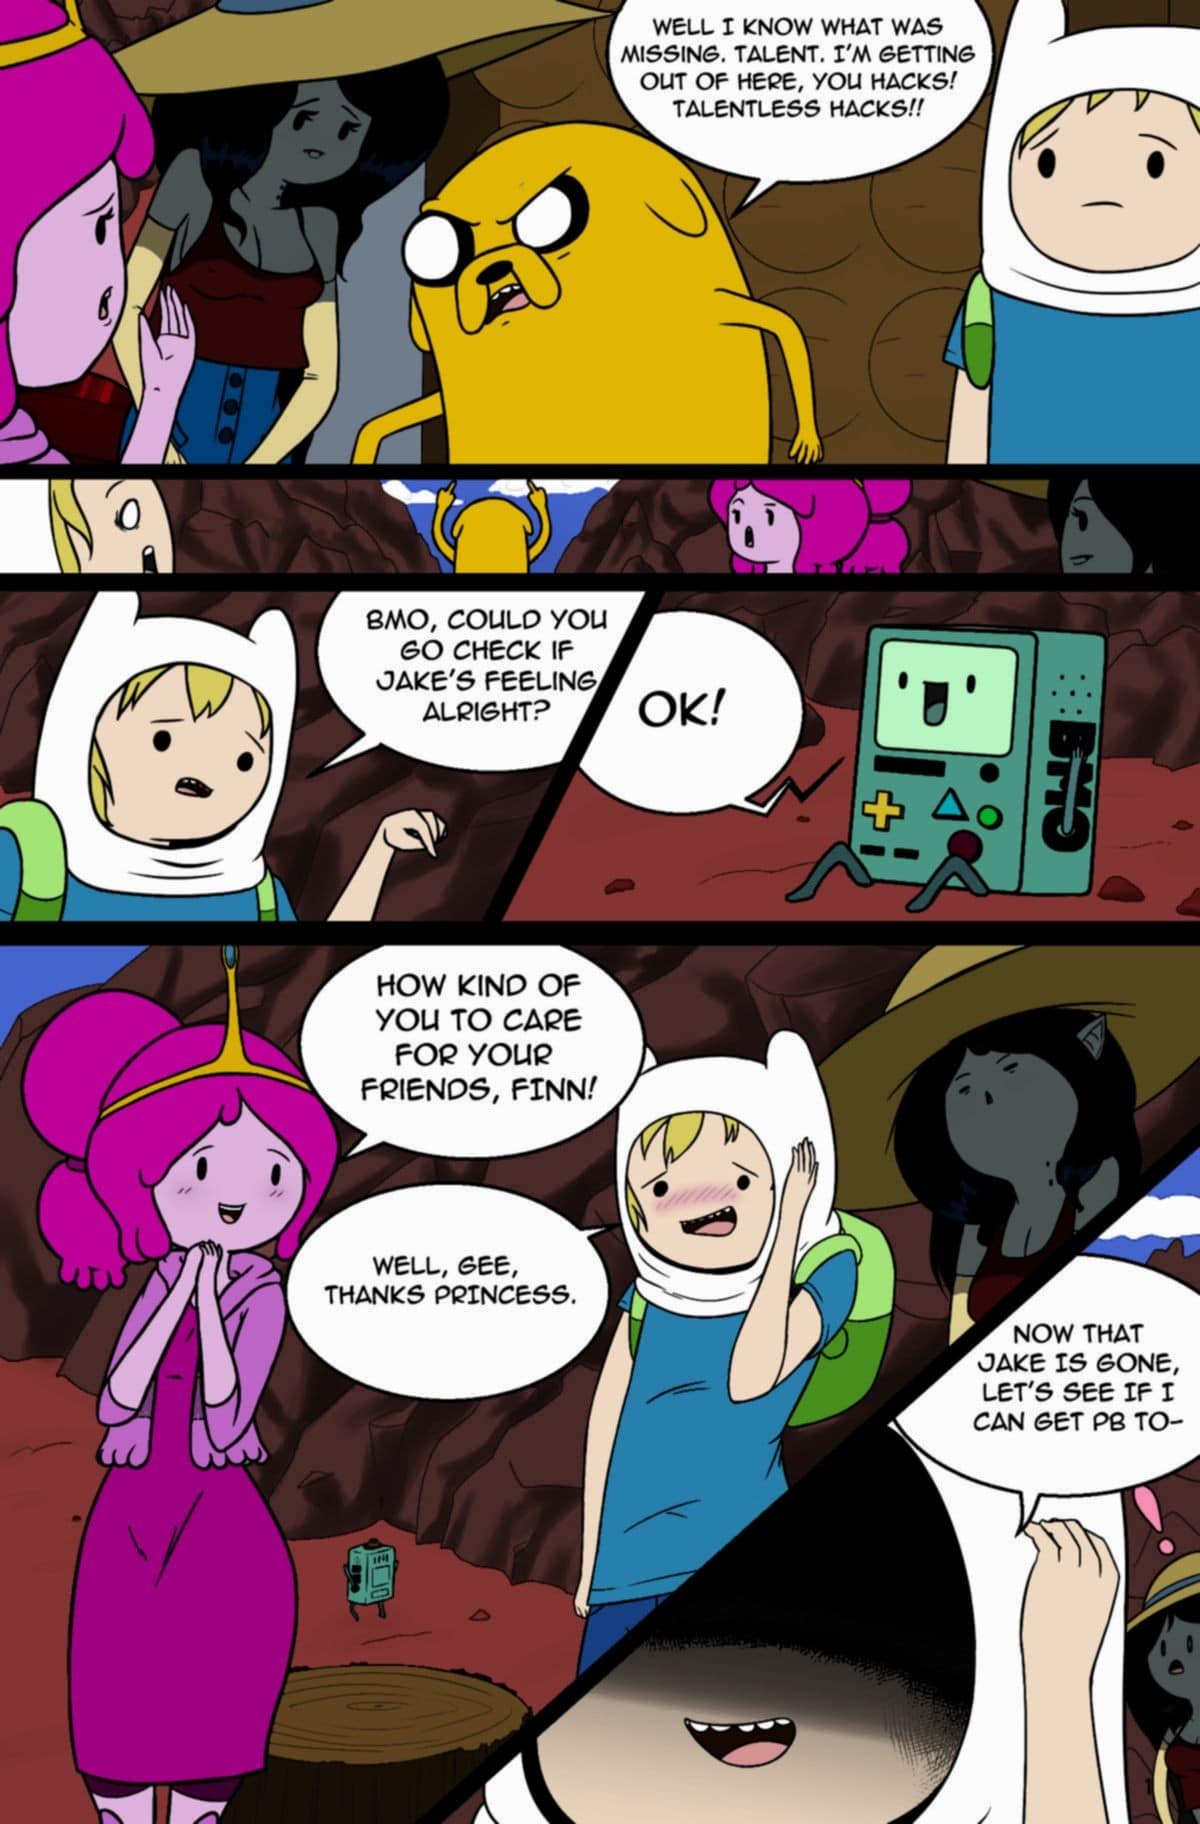 Bmo Adventure Time Hentai Porn - Mis Adventure Time 2 - What Was Missing - KingComiX.com